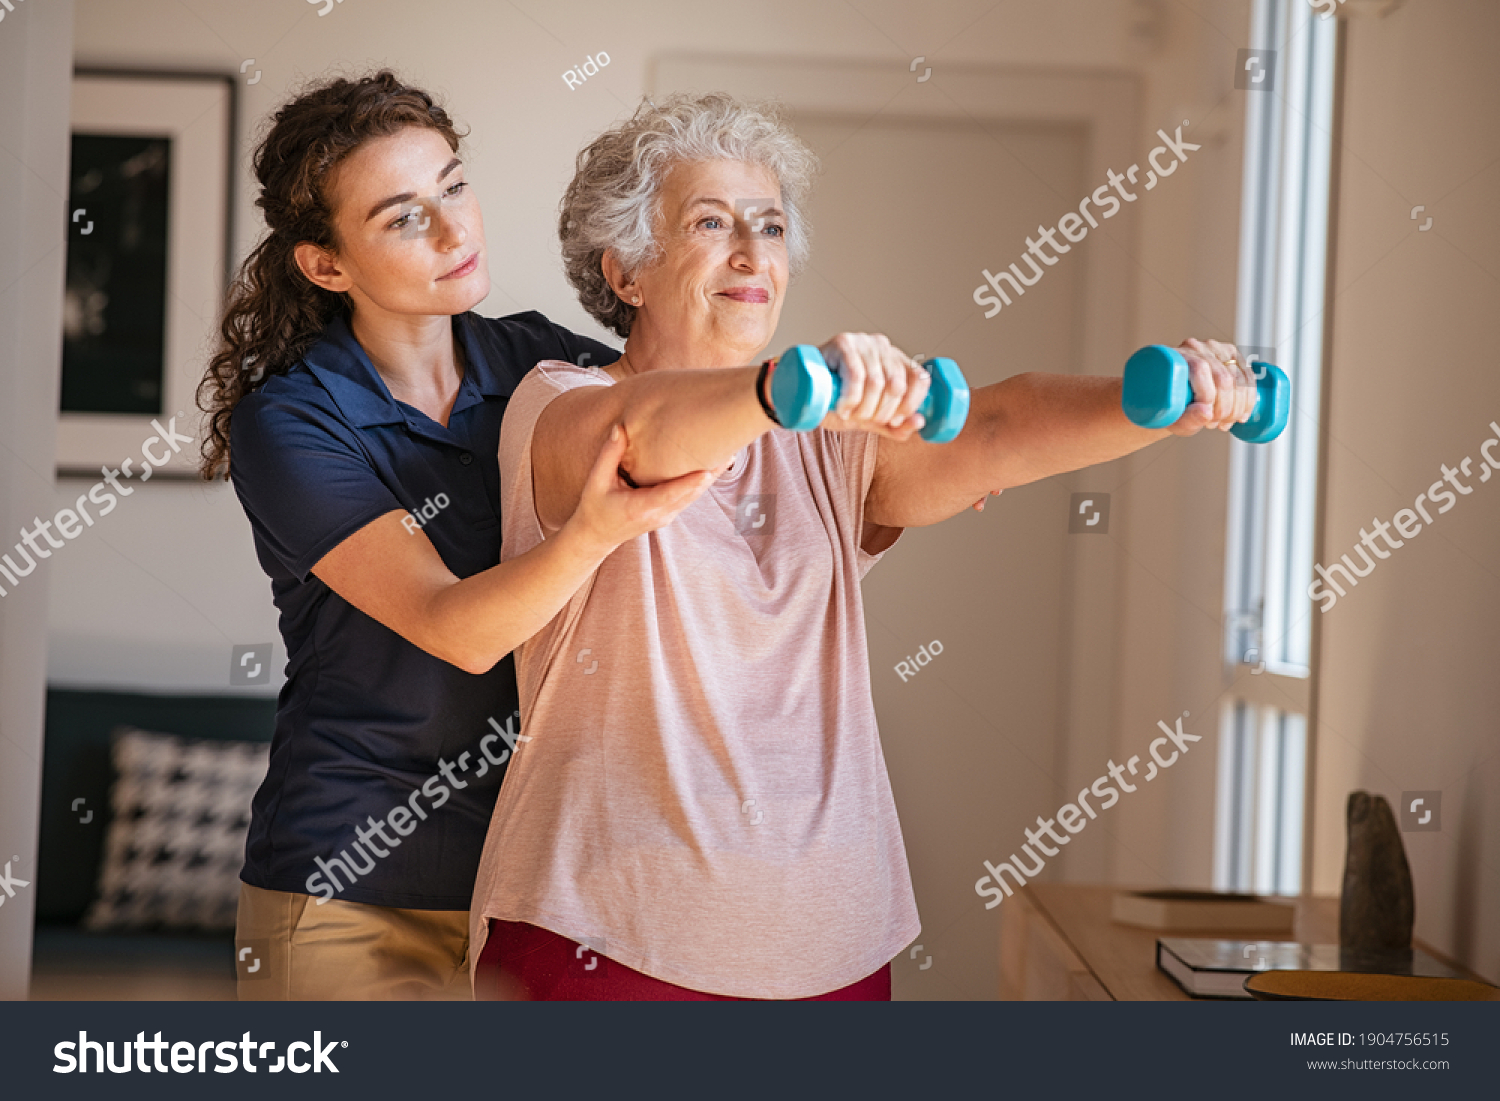 Old woman training with physiotherapist using dumbbells at home. Therapist assisting senior woman with exercises in nursing home. Elderly patient using dumbbells with outstretched arms. #1904756515